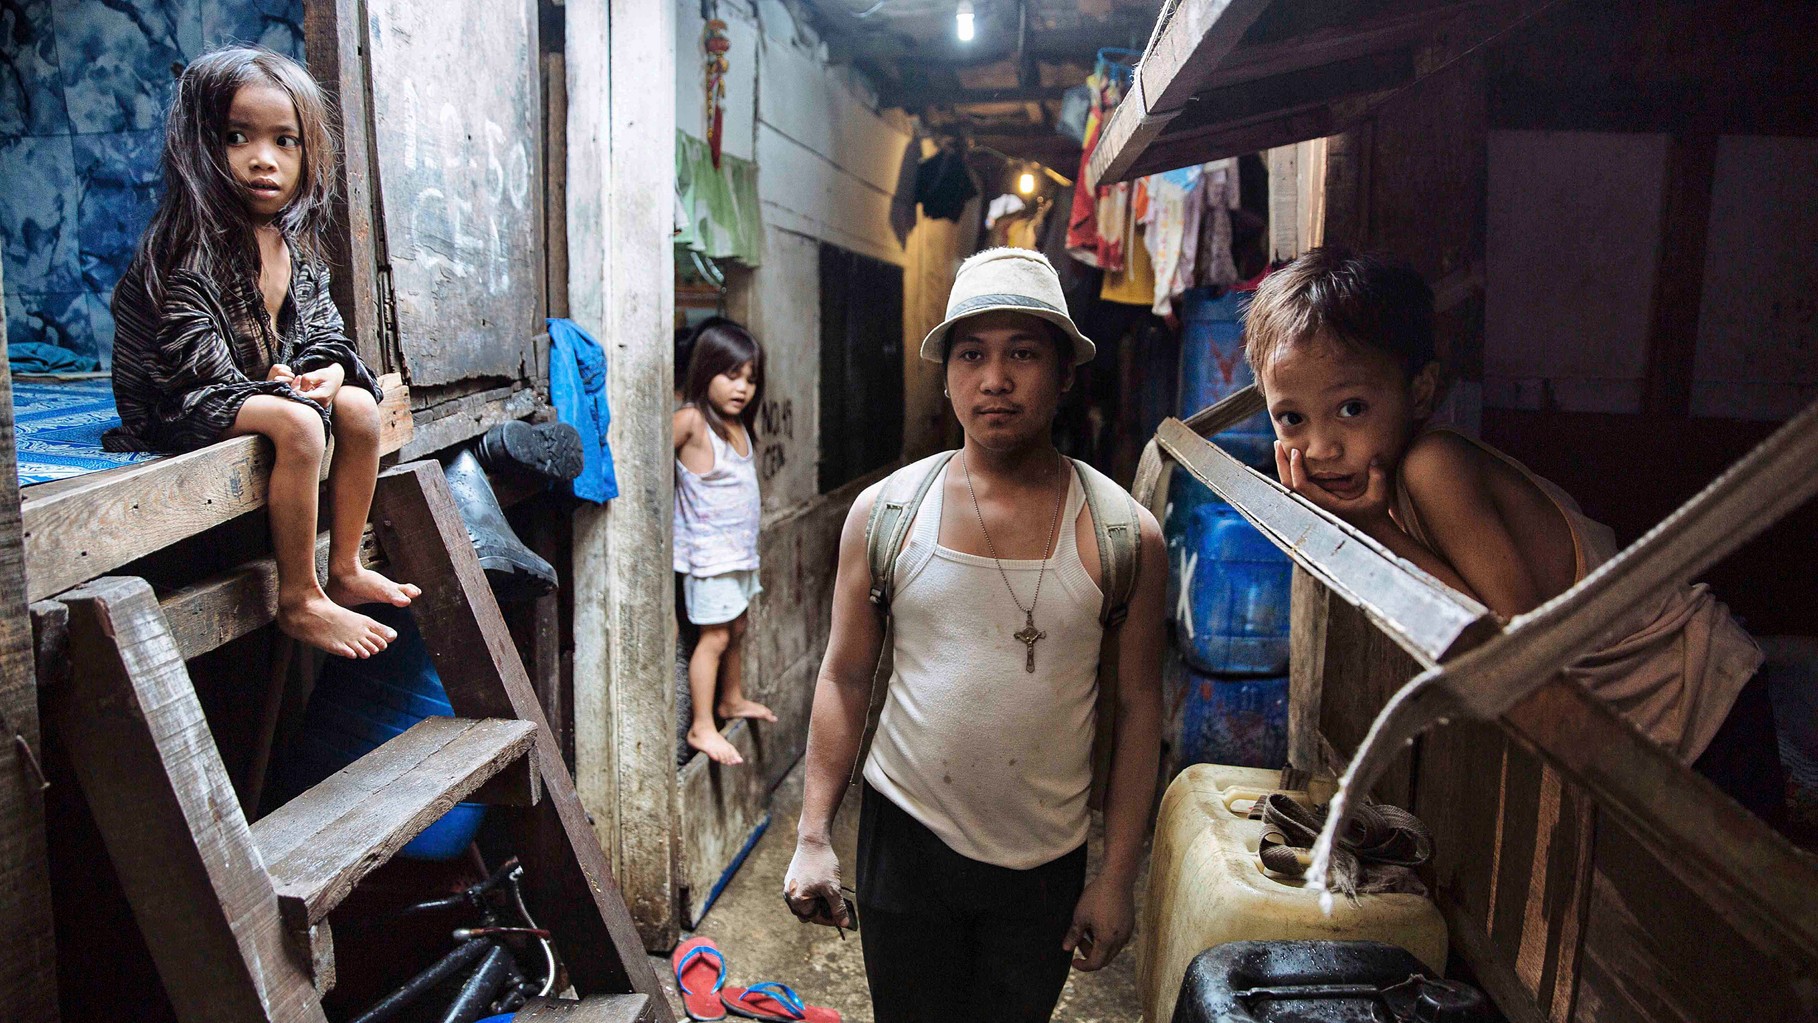 People stay in Manila, because they can find jobs, even the salary is low